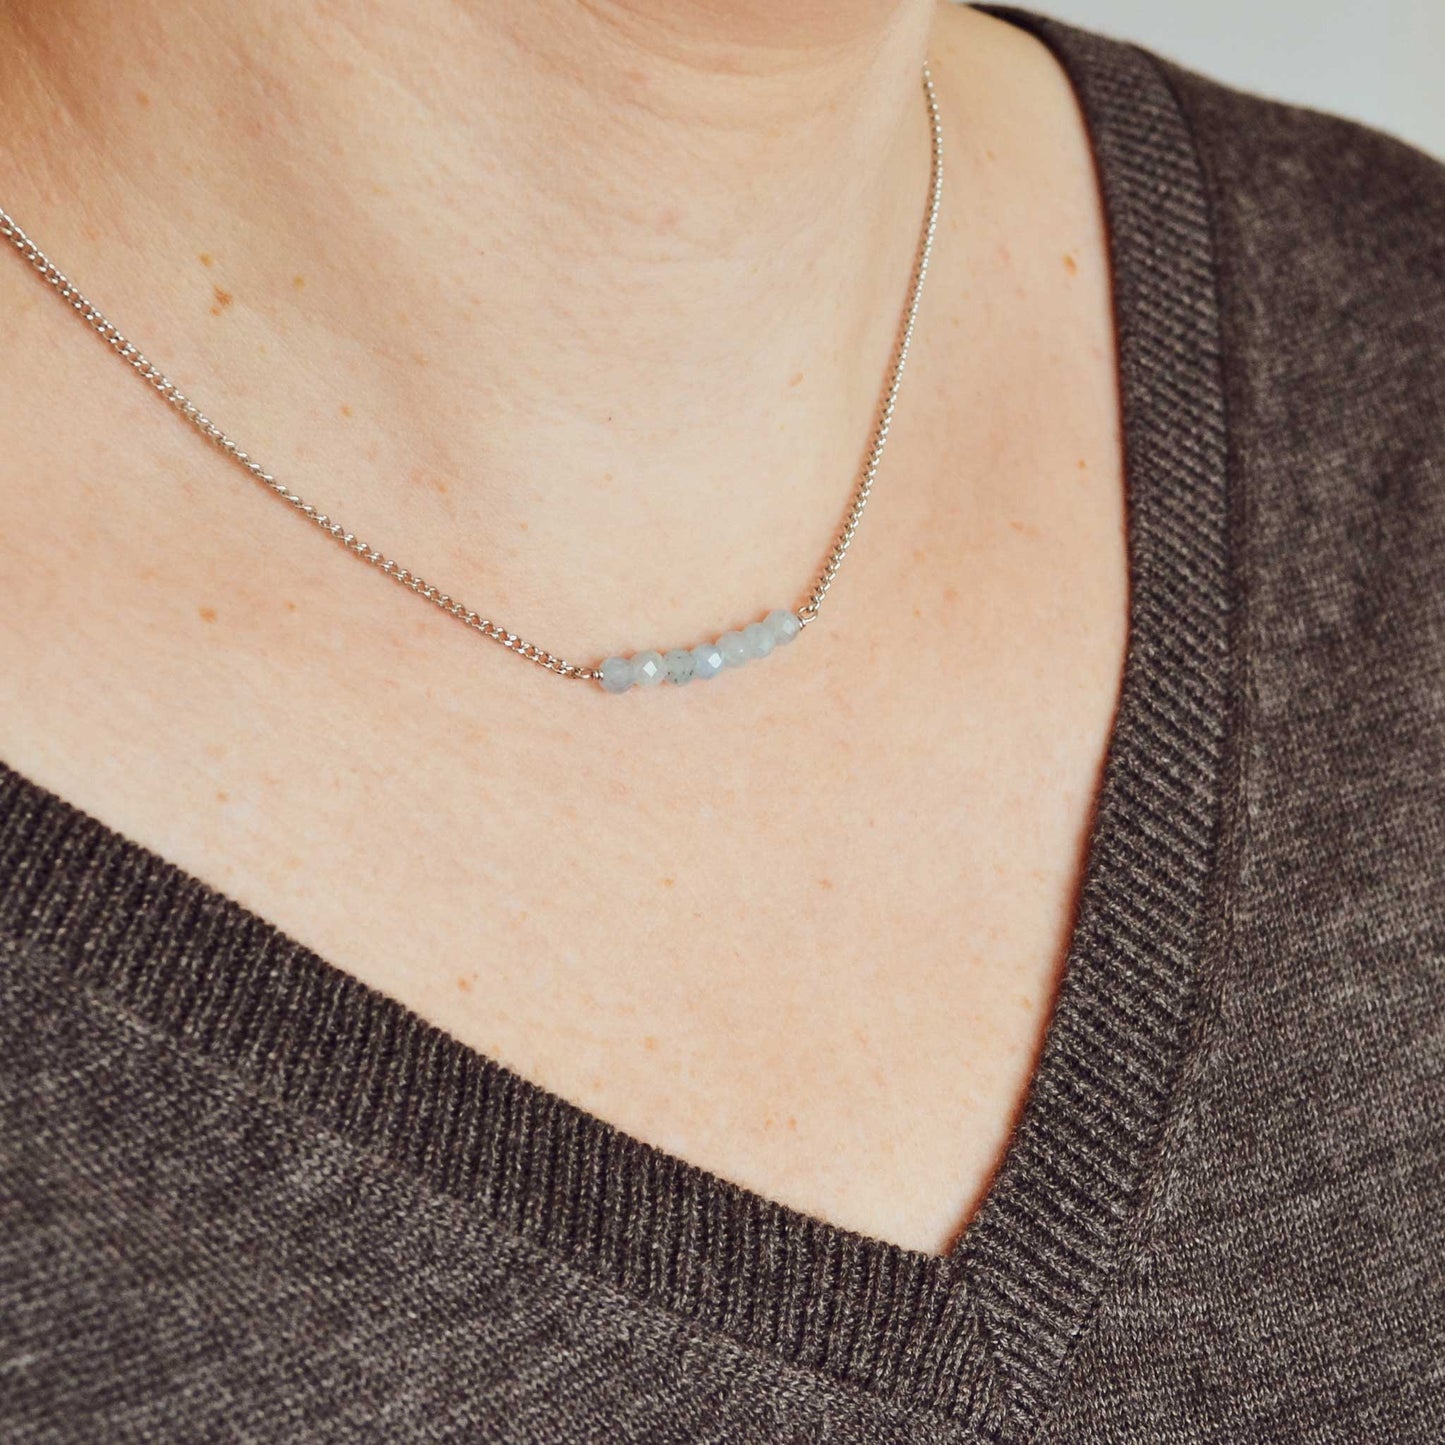 Woman wearing grey v neck jumper and dainty Aquamarine necklace